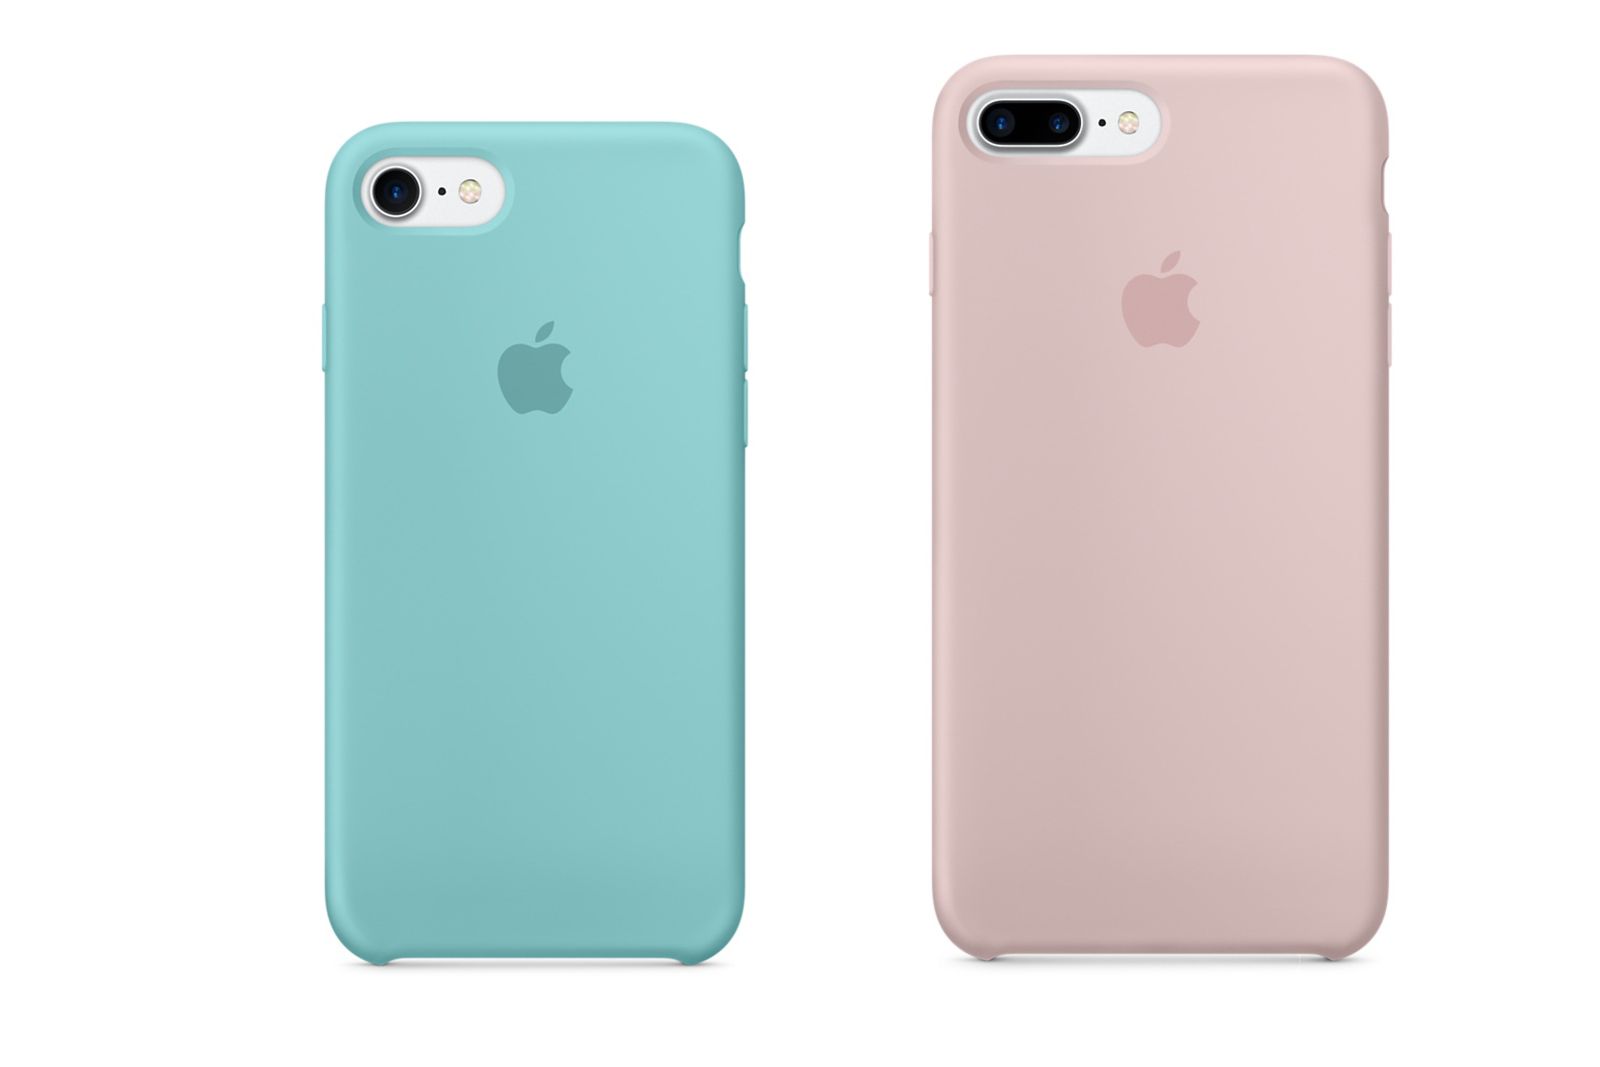 best iphone 7 and iphone 7 plus cases protect your apple device image 2